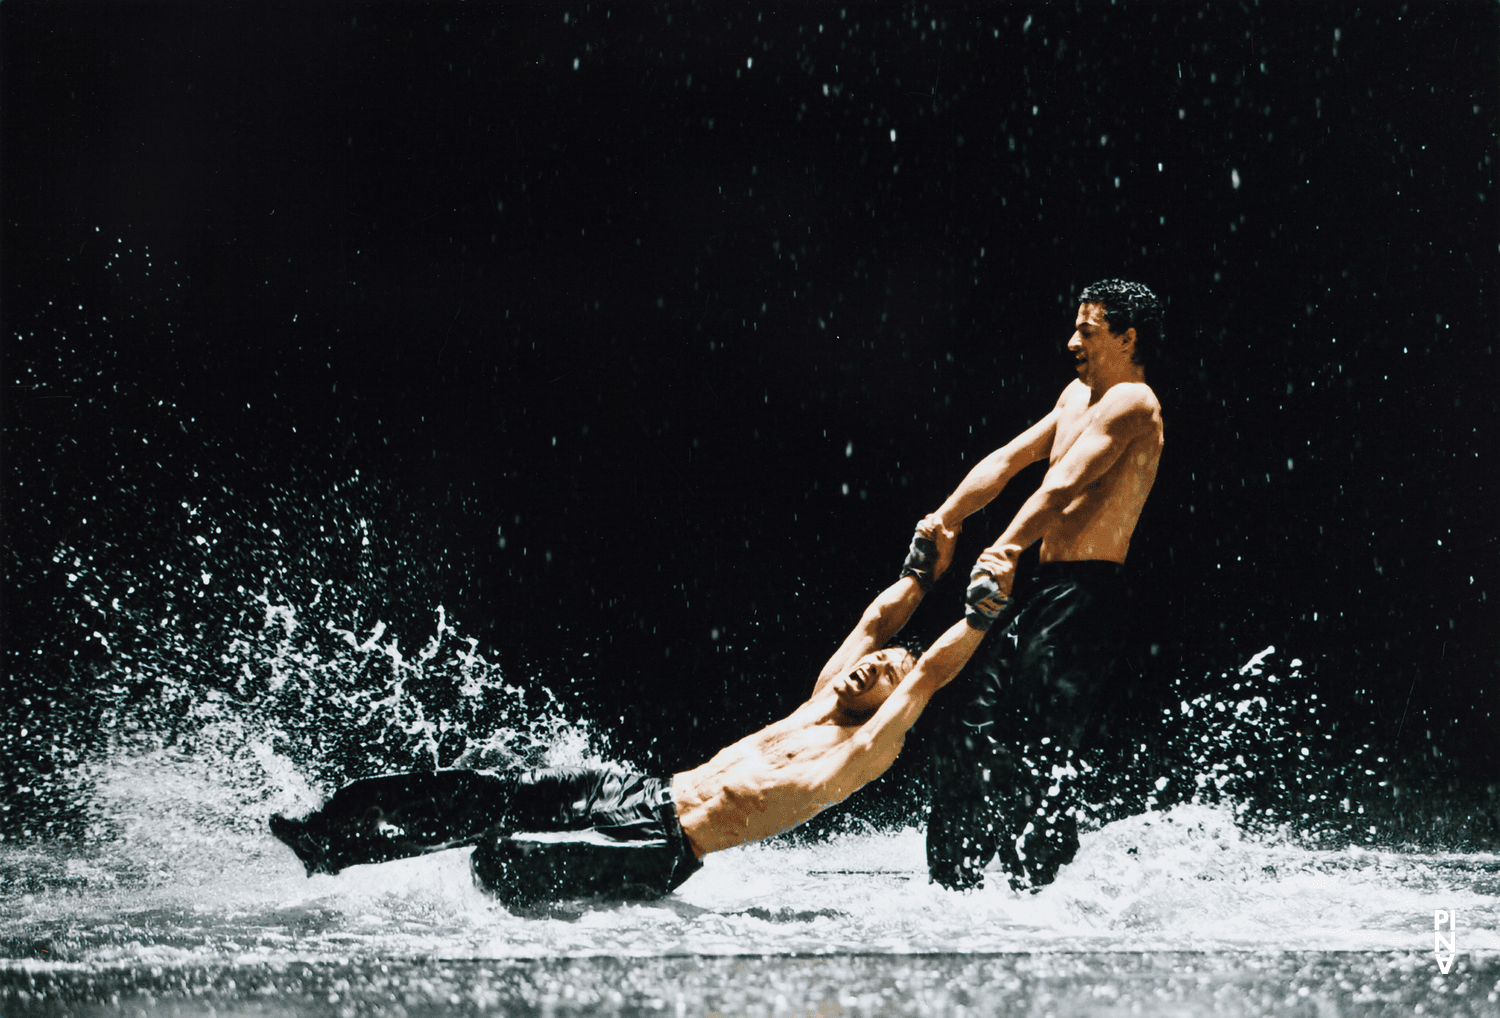 Fernando Suels Mendoza and Rainer Behr in “Vollmond (Full Moon)” by Pina Bausch, May 11, 2006